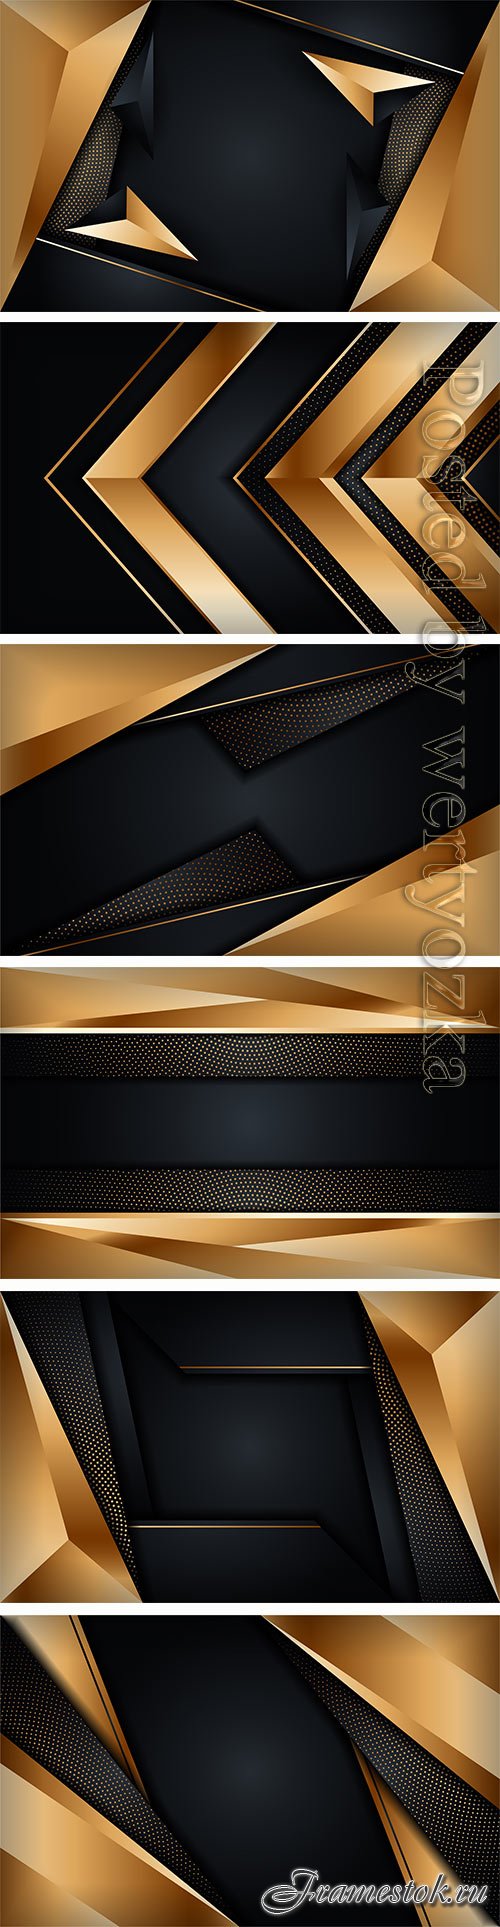 Abstract luxury dark background with golden lines combinations